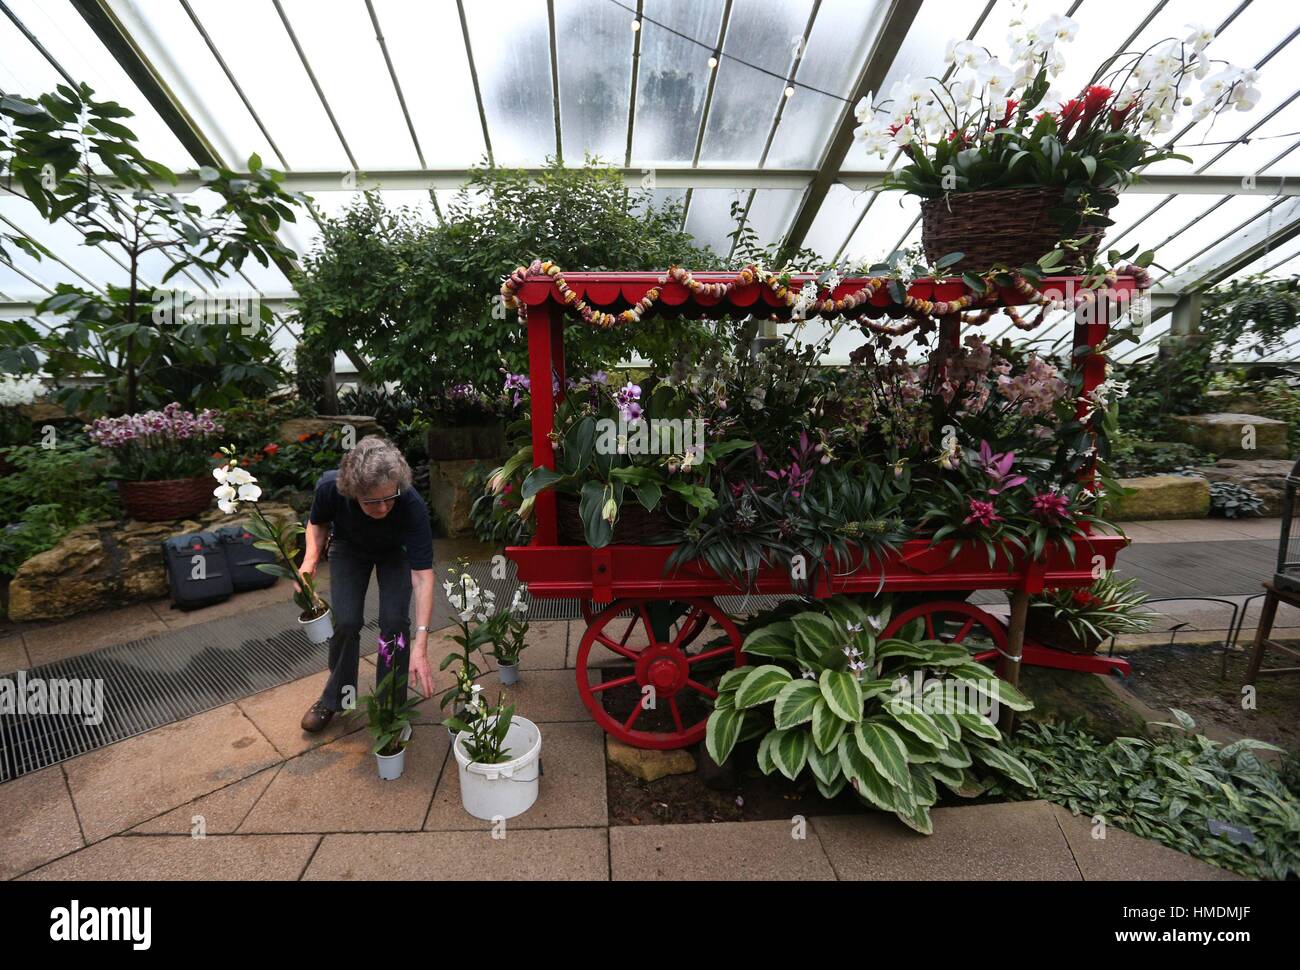 A horticulturalist puts the finishing touches to a rickshaw inspired display at the Kew Orchid festival in the Prince of Wales Conservatory at Kew Gardens in west London. Stock Photo